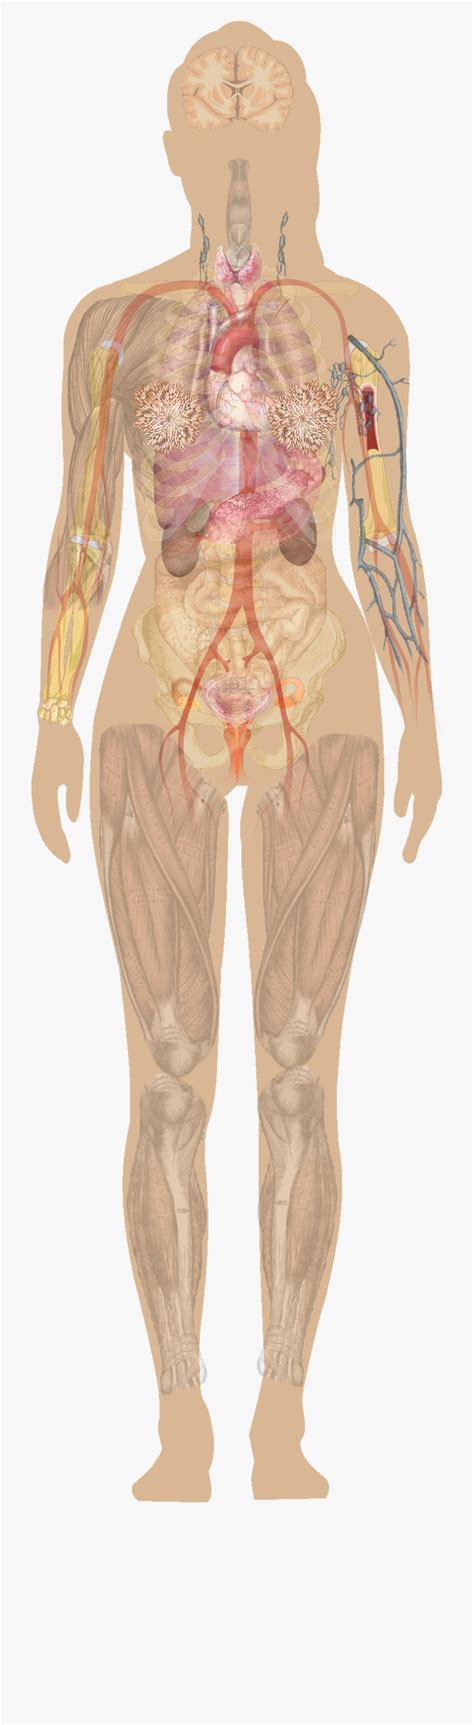 The measurement (ideal male height = eight heads) was set down during the renaissance as an idealization of the human form. Male Anatomy Diagram Labelled : Reproductive System - Anatomy & Physiology 316 with ... / Get ...